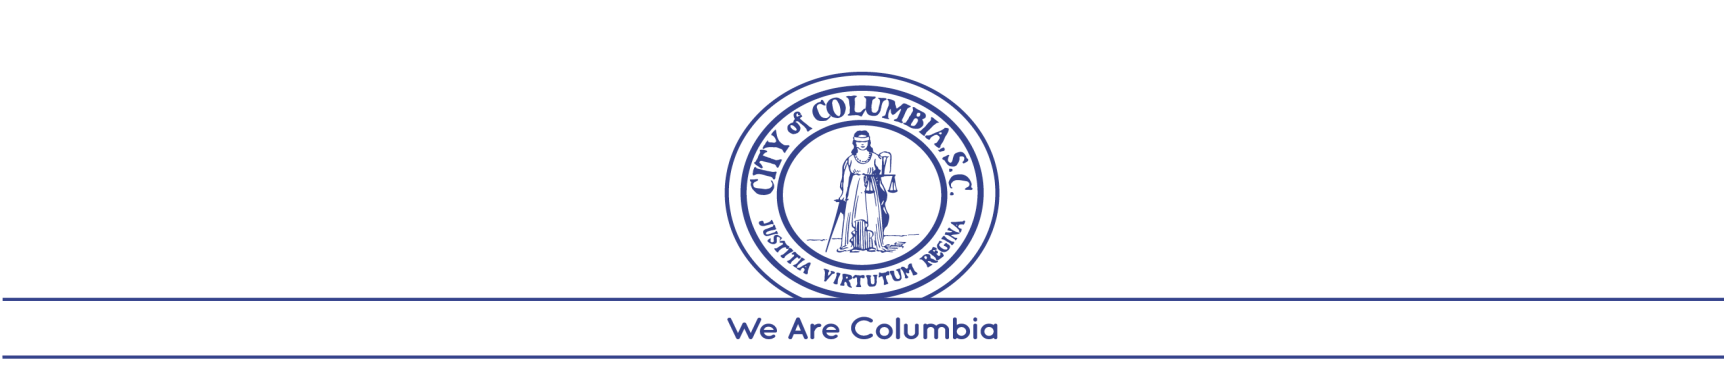 /users/carolsmith/documents/city of columbia/stationery package/2012 stationery package/cofc finals/word files/supporting images/cofcletterhead-header-01.tif